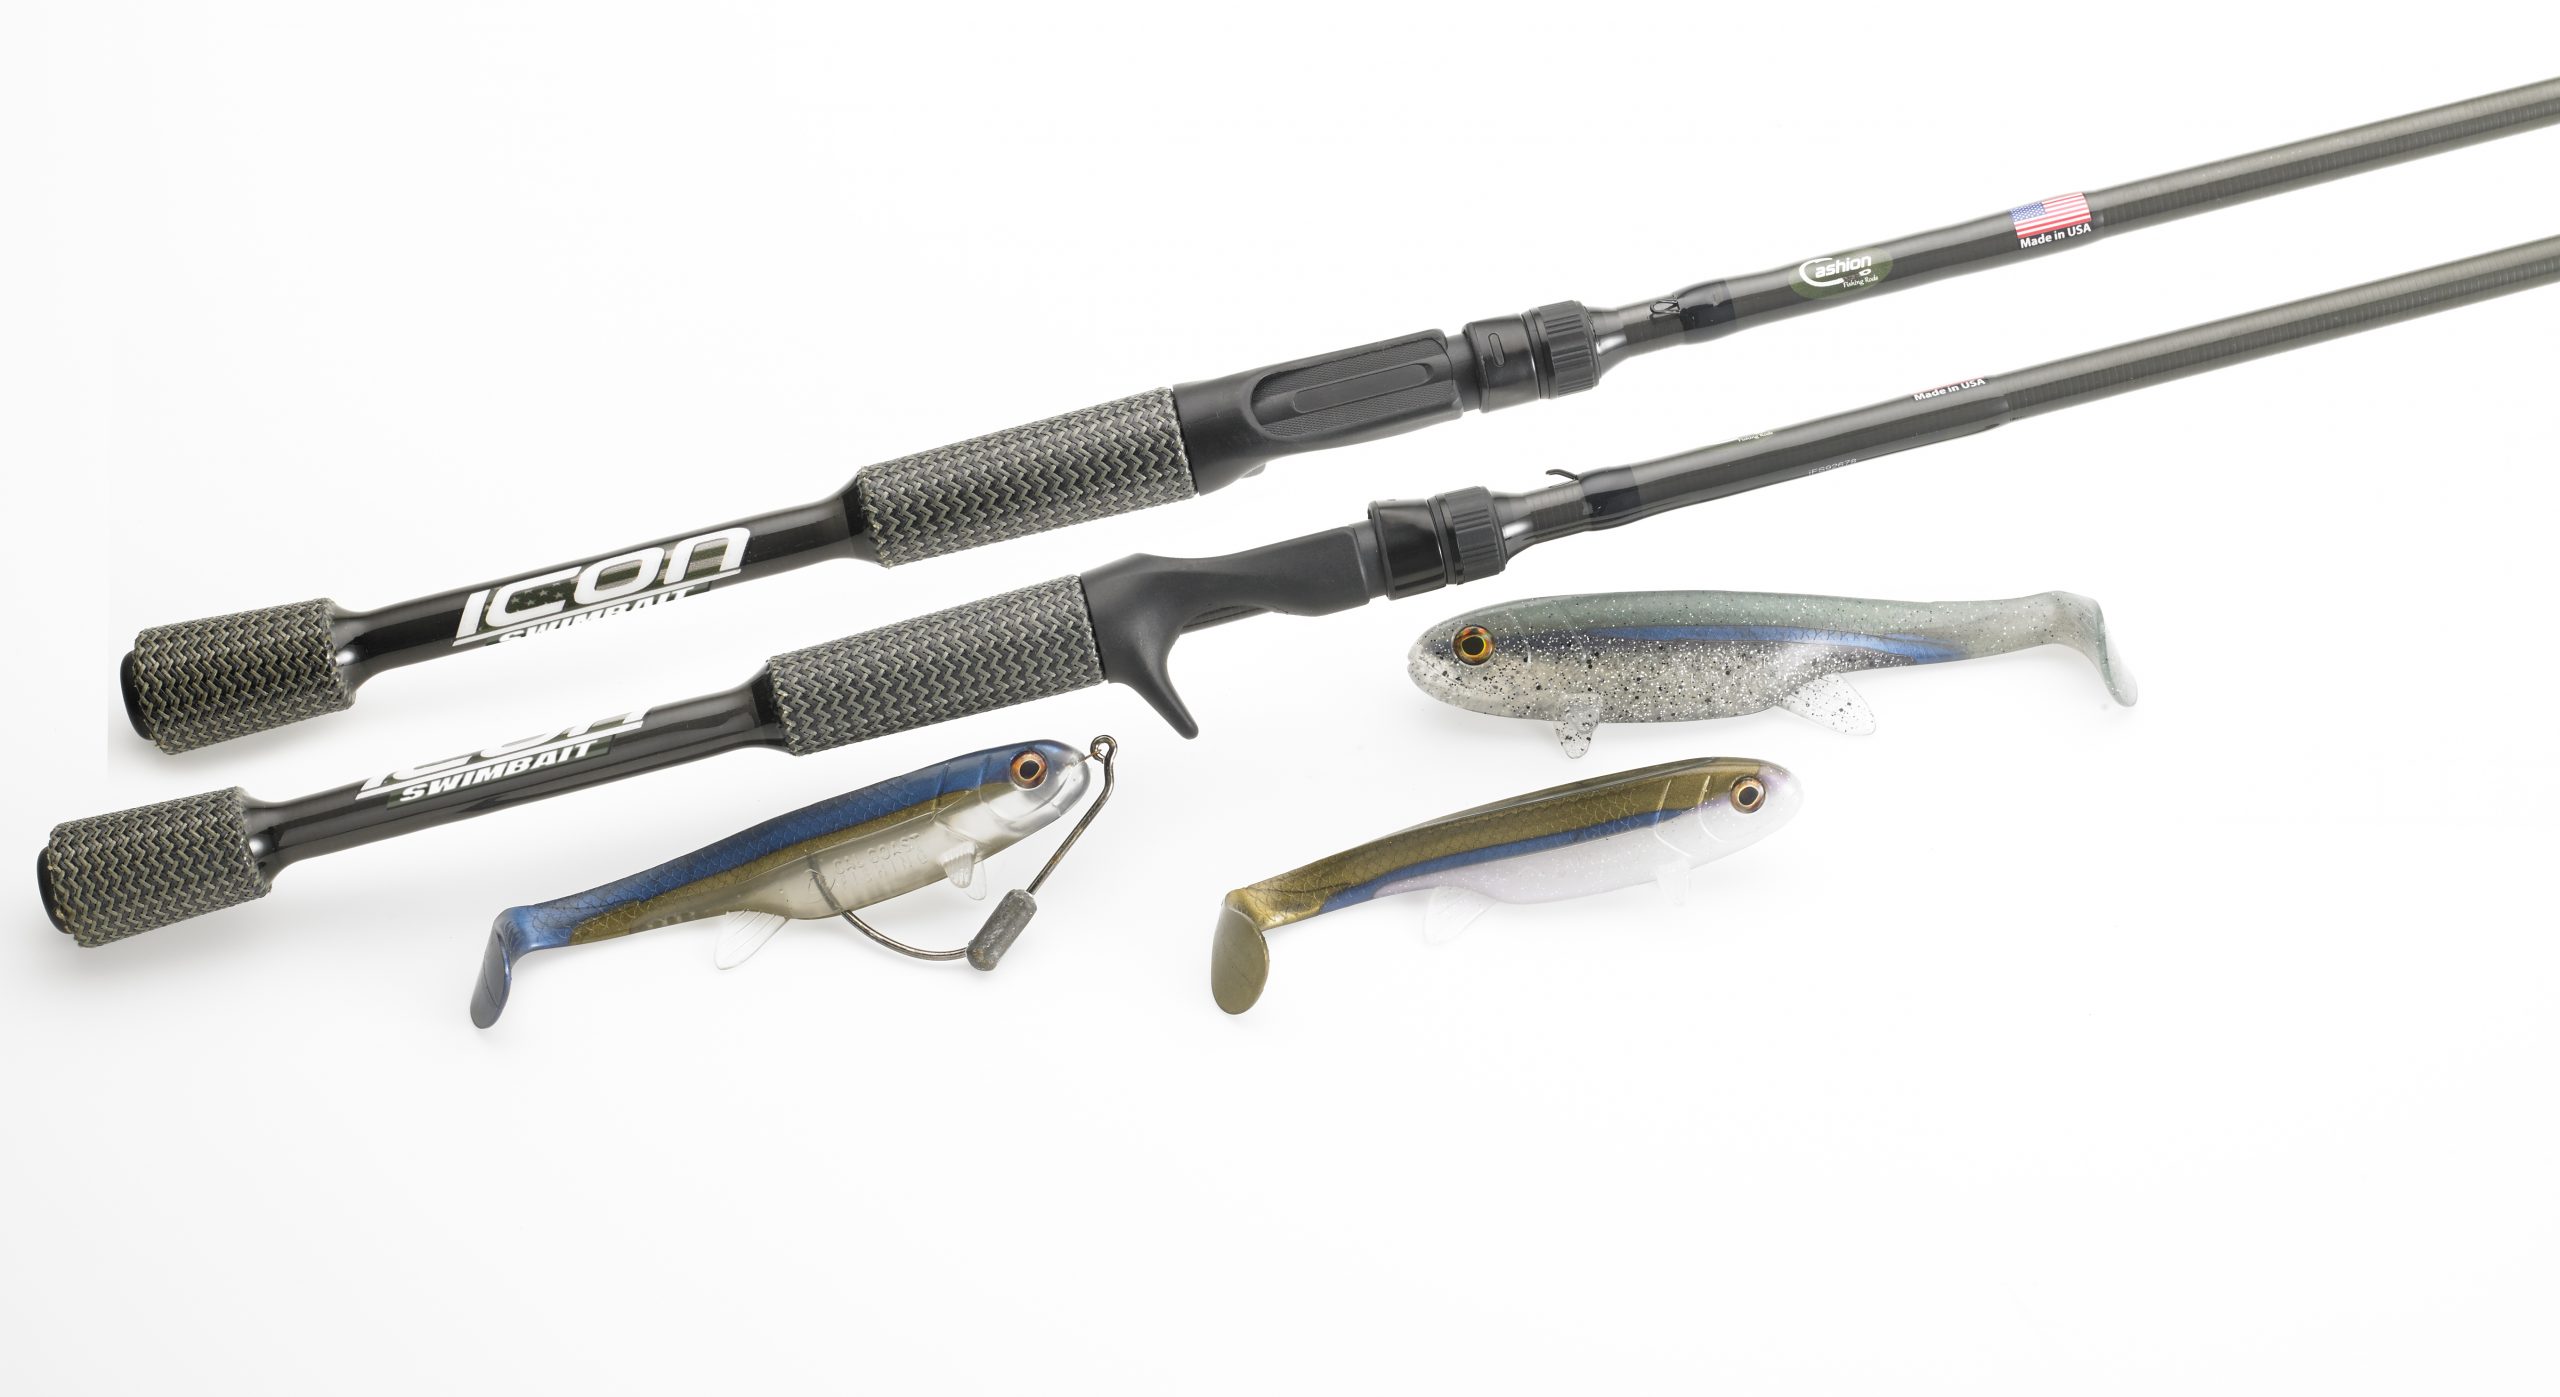  Best Fishing Rods, Reels, Swimbaits and Lures !